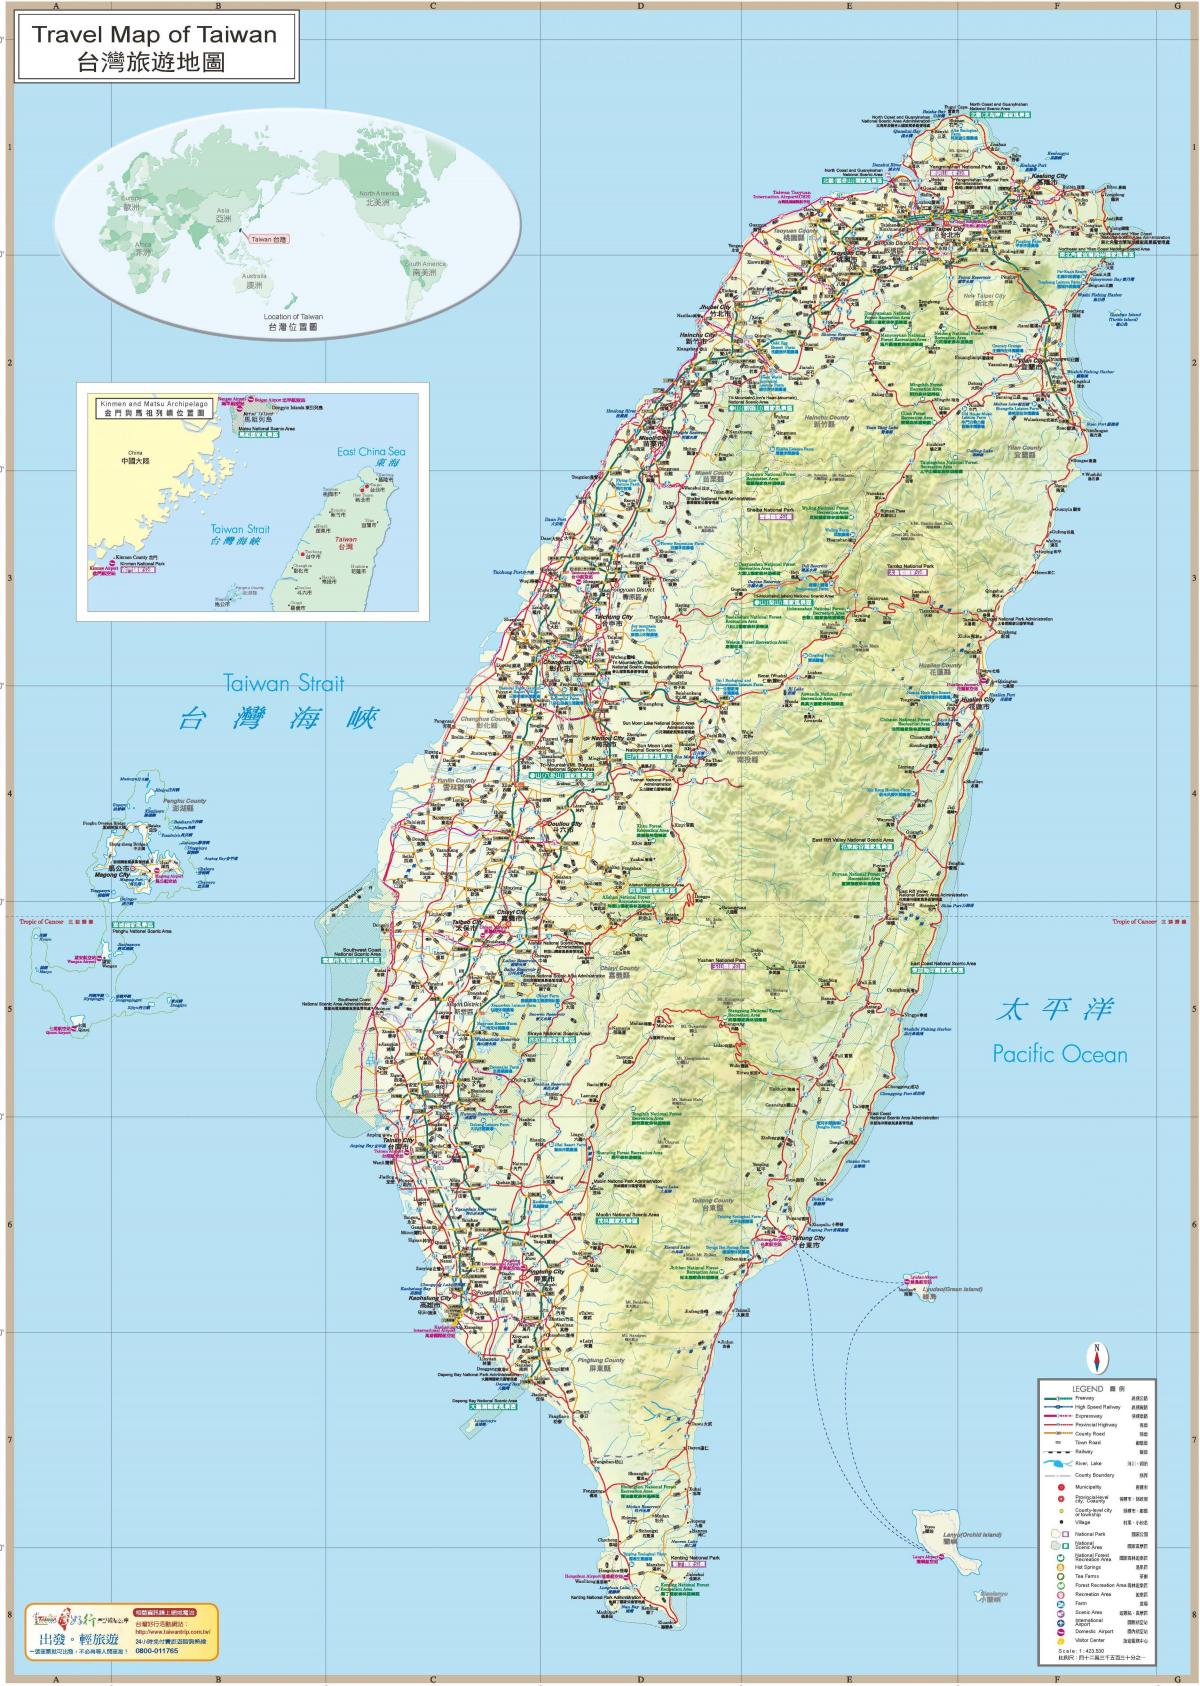 Taiwan travel guide map